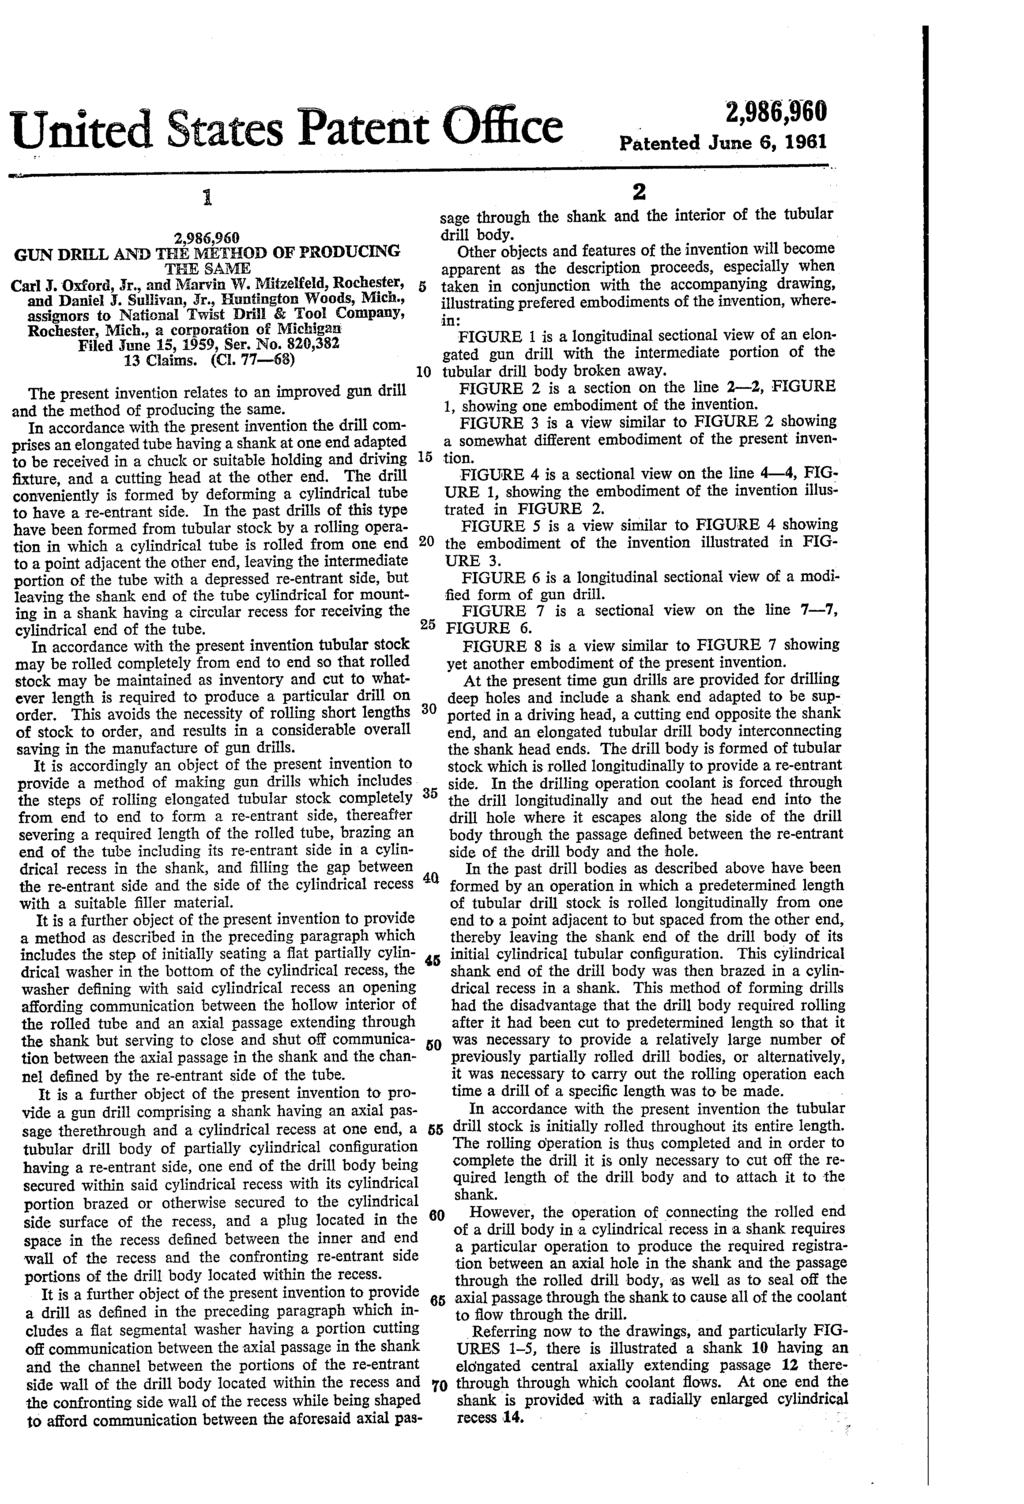 United States Patent Office GUN DRILL AND THE METHOD OF PRODUCING THE SAME Carl J. Oxford, Jr., and Marvin W. Mitzefeld, Rochester, and Daniel J. Sullivan, Jr., Huntington Woods, Mich.